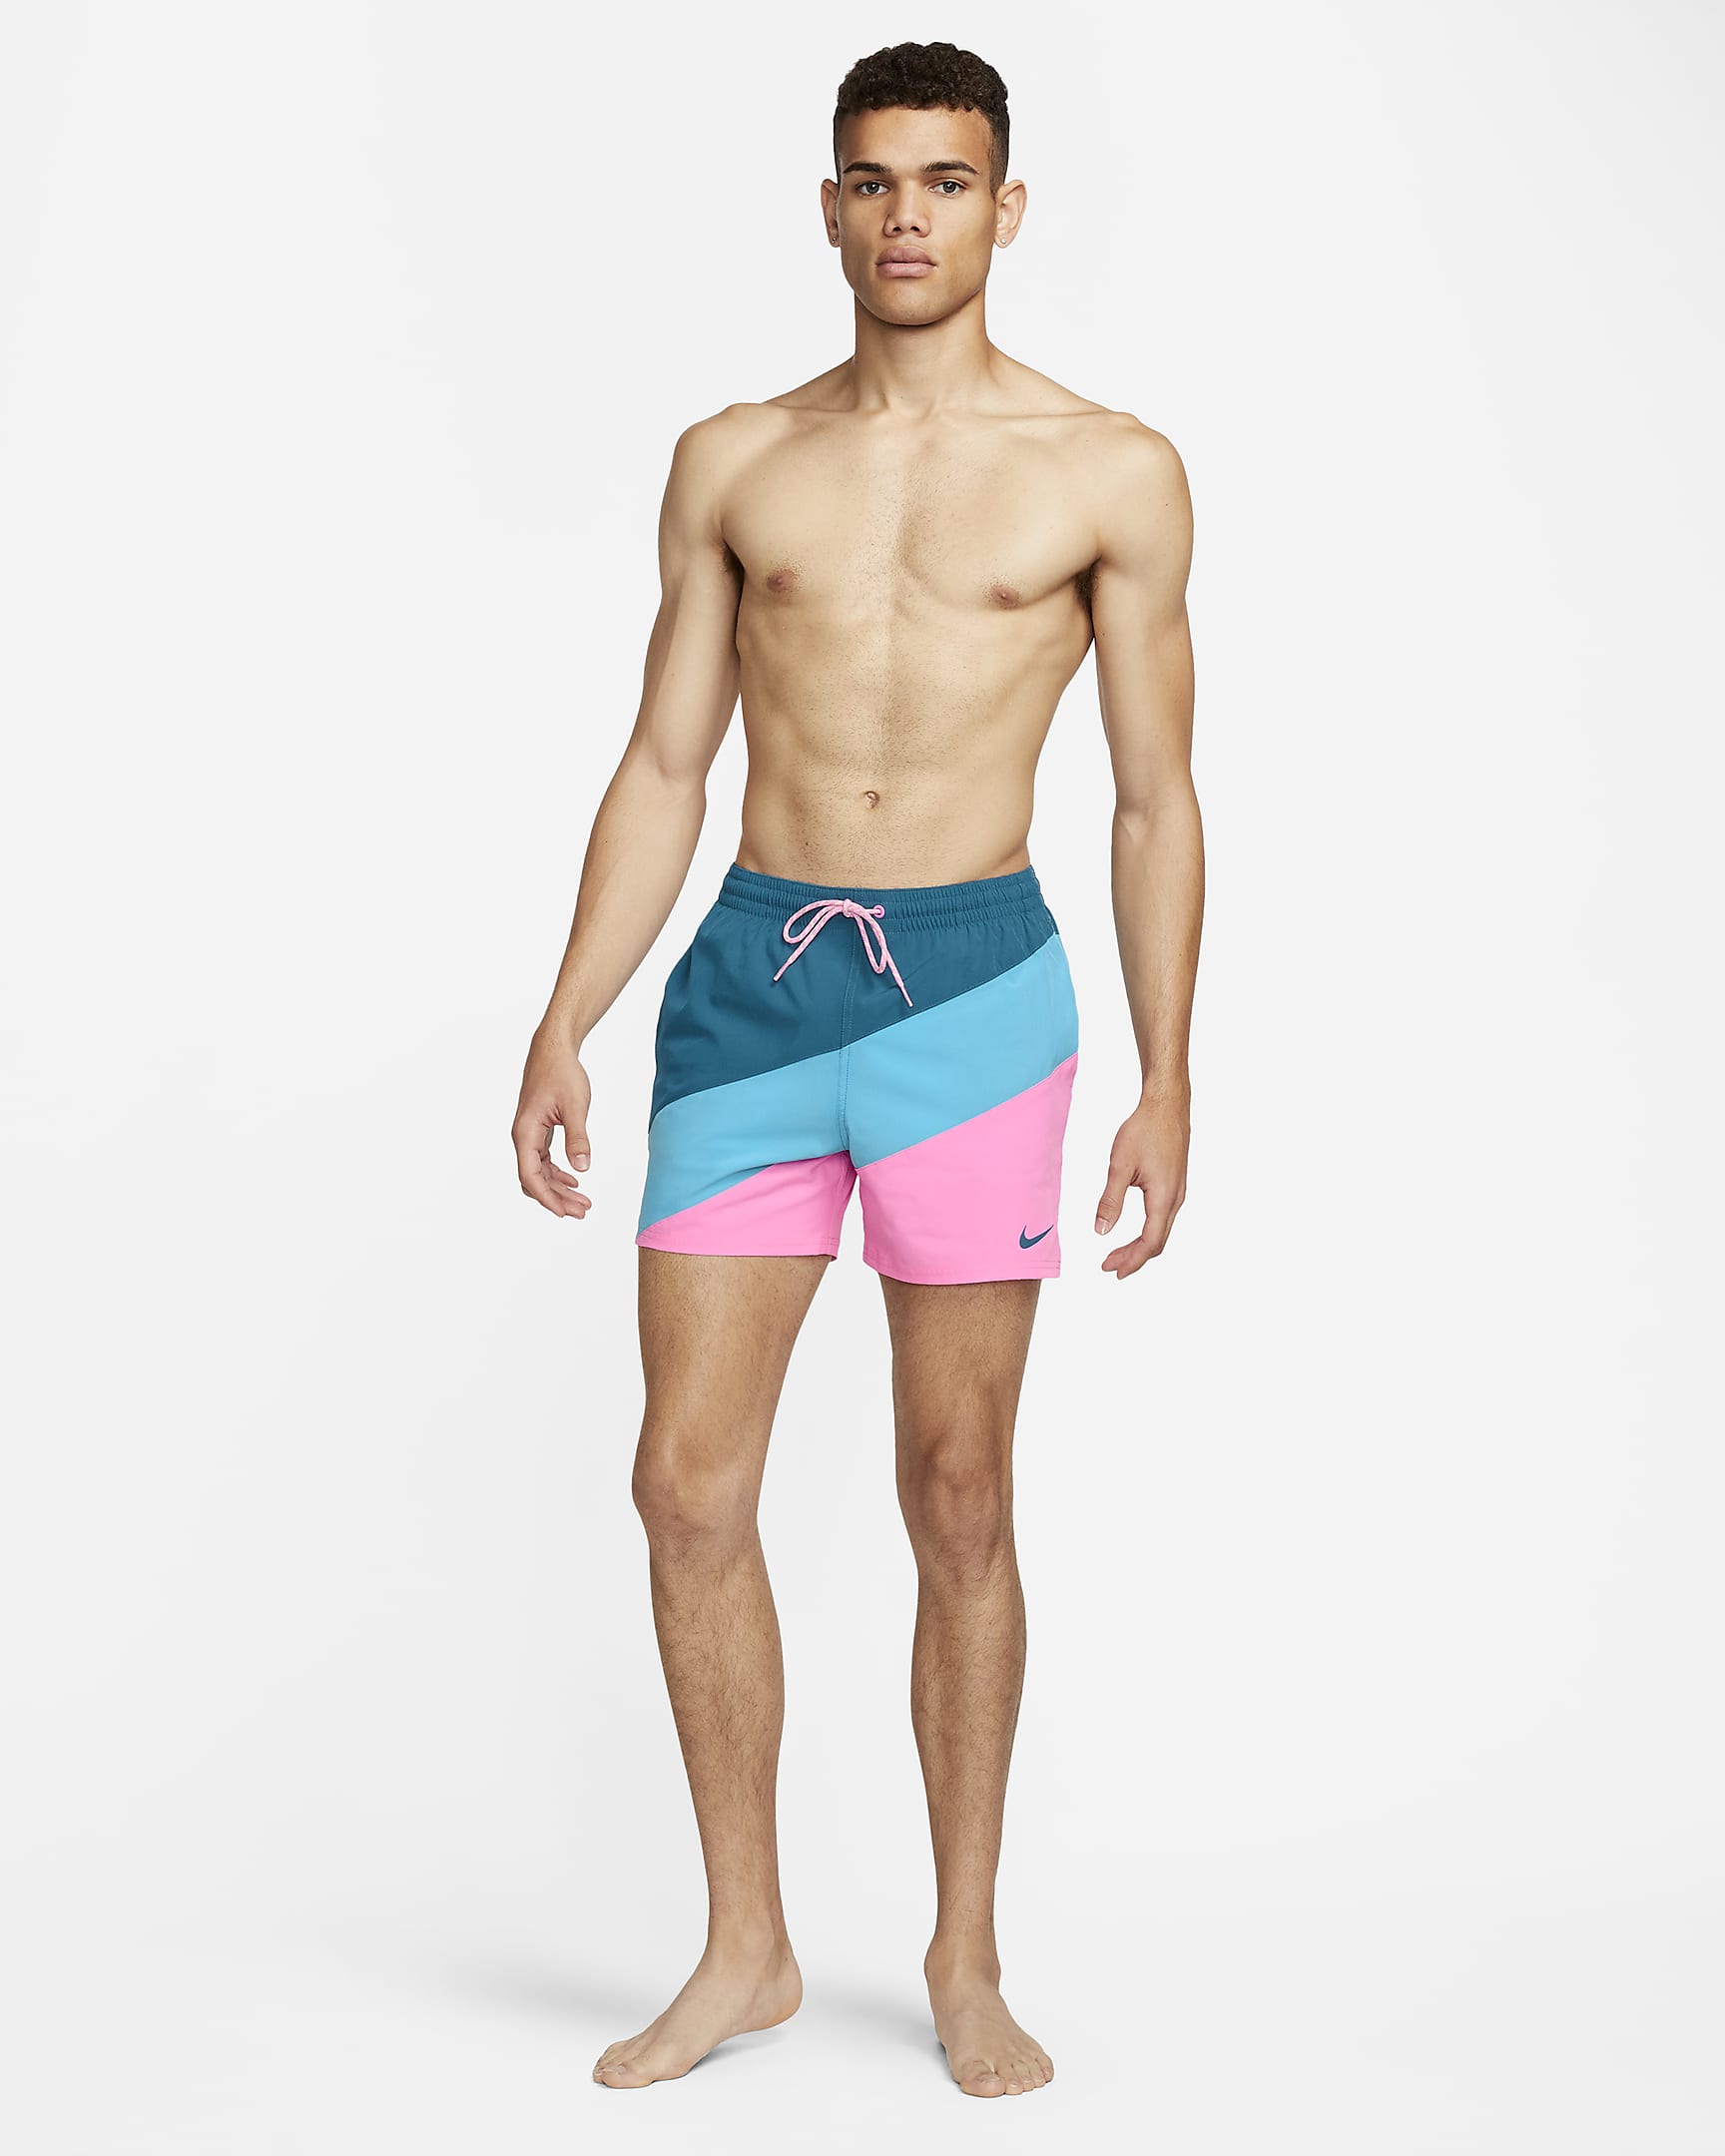 Men's 13cm (approx.) Volley Swimming Shorts. Nike PT